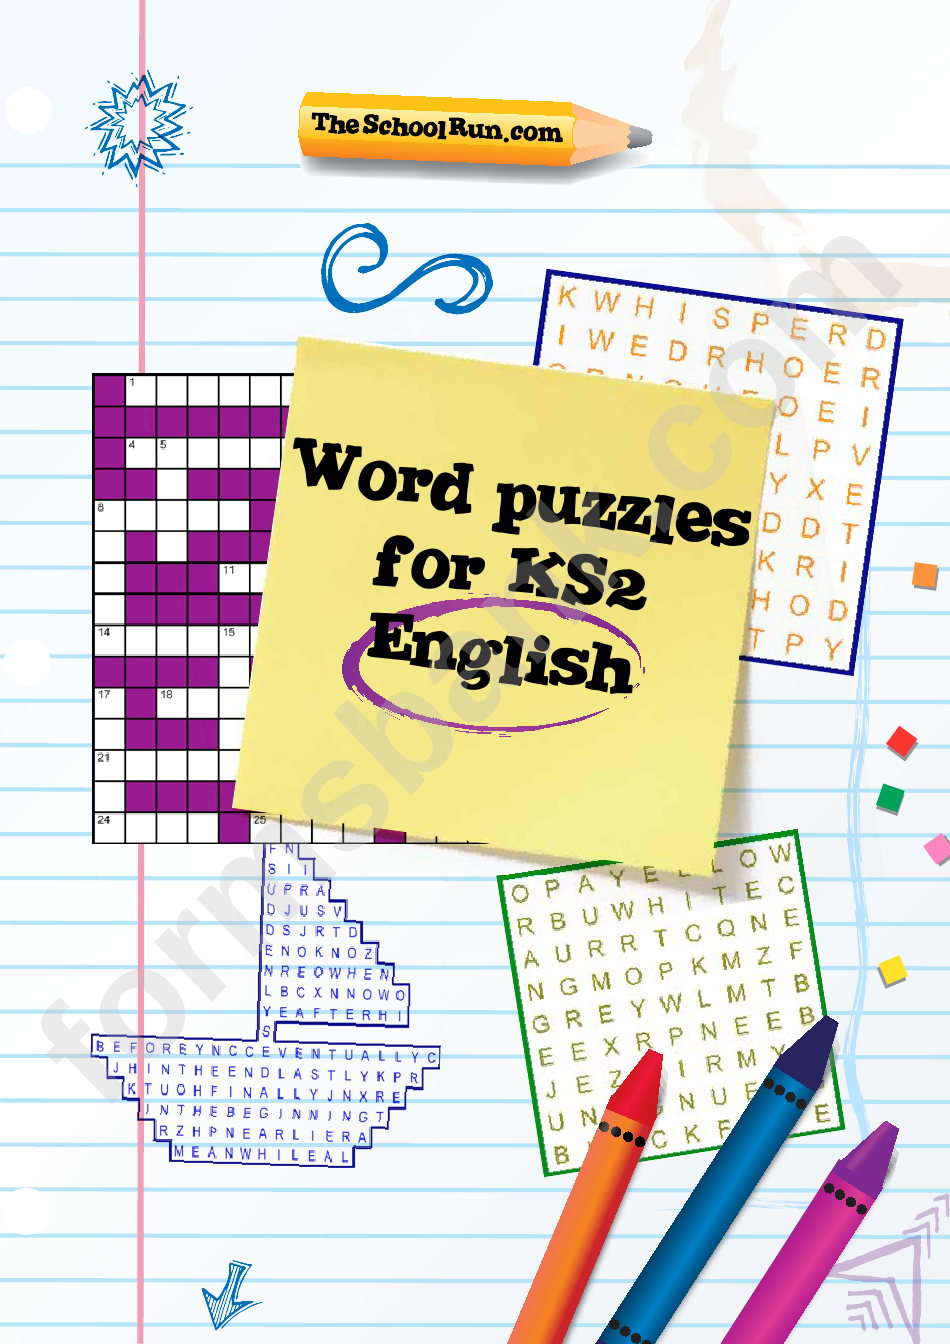 Word Puzzles For Ks2 English